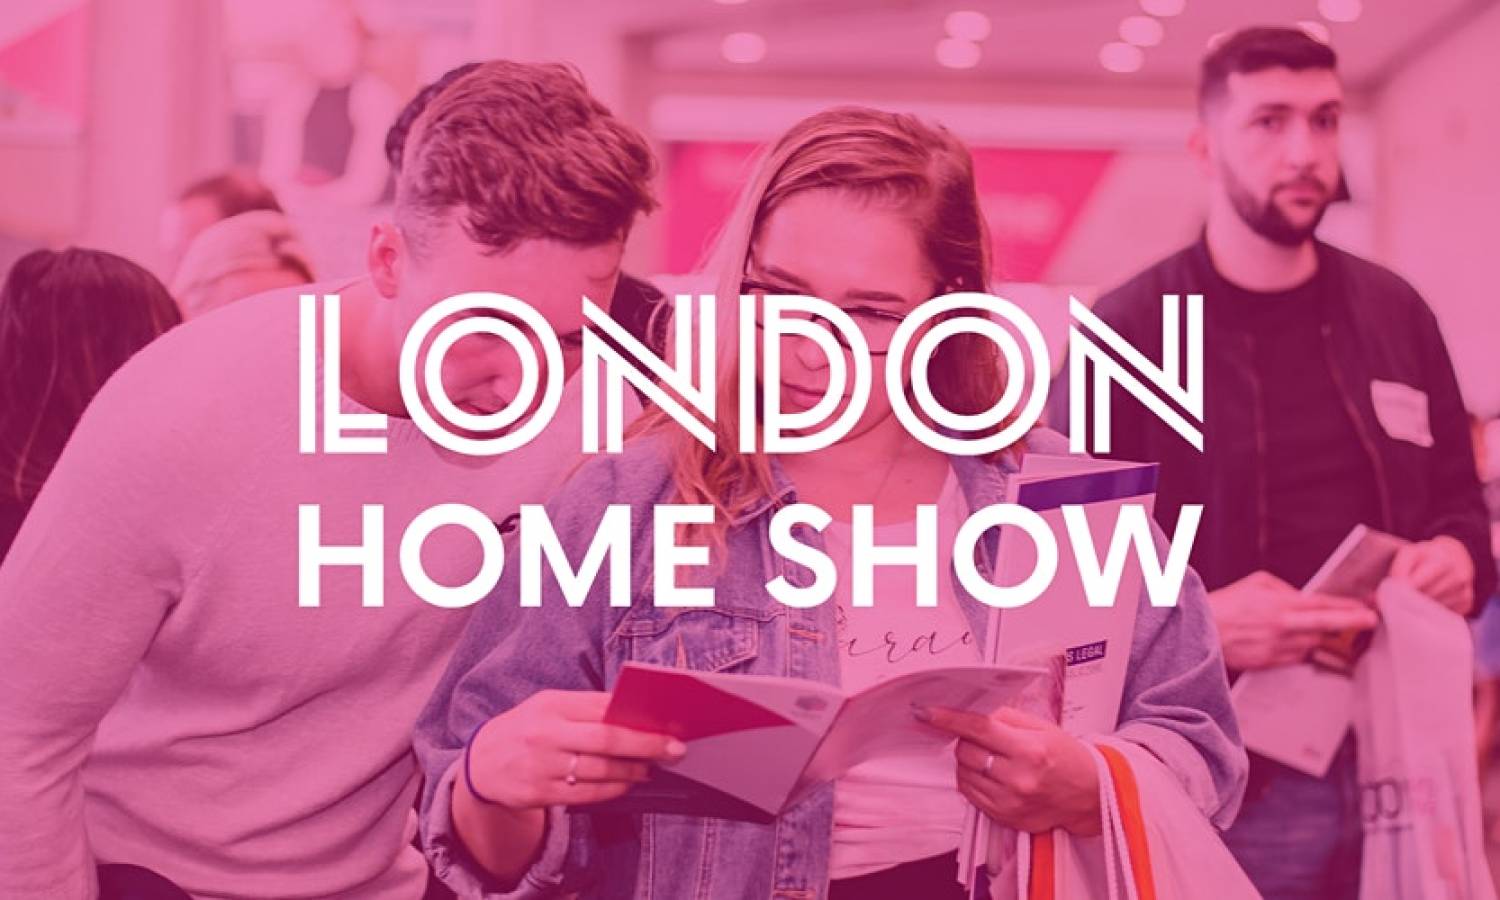 The return of London Home Show to Westminster